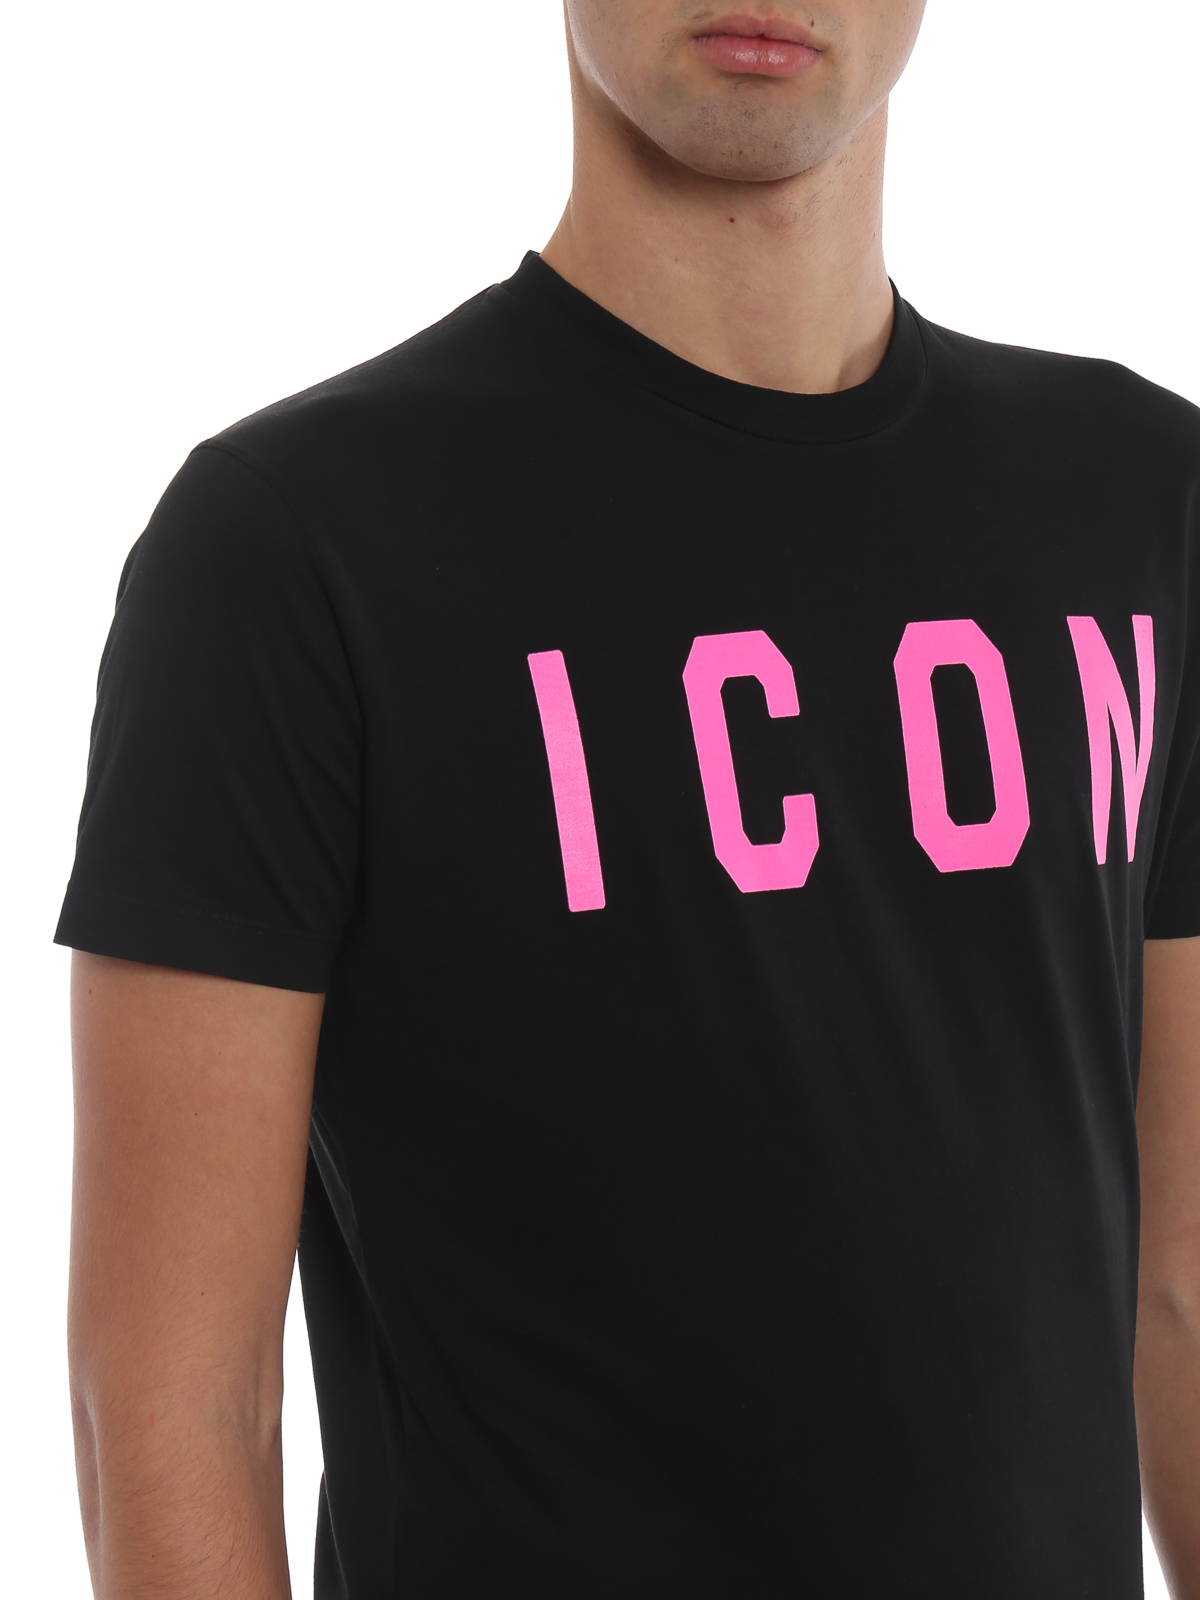 icon dsquared2 t shirt